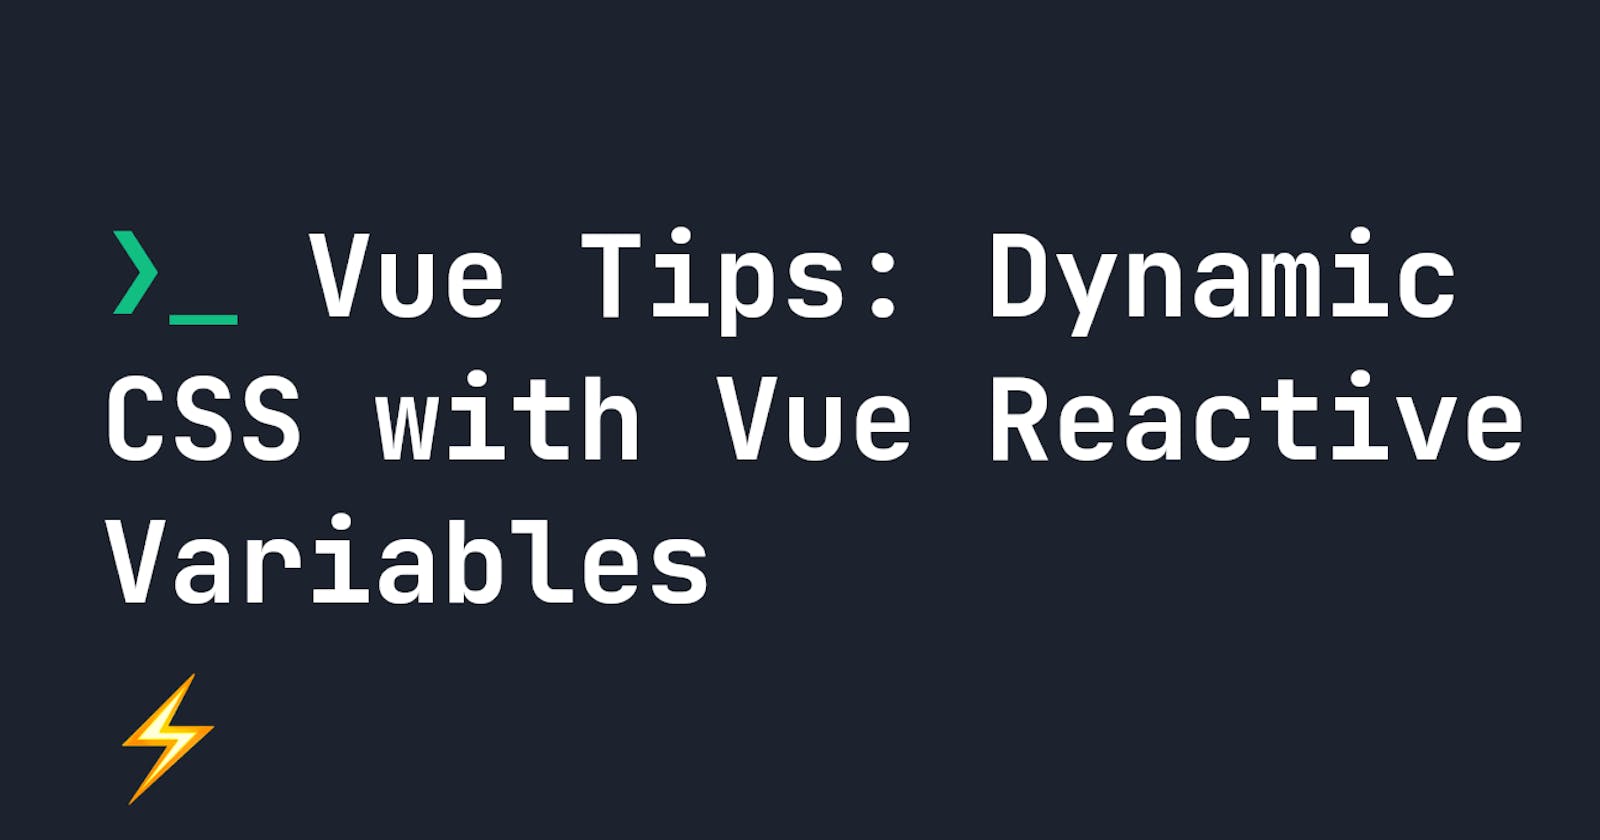 Vue Tips: Dynamic CSS with Vue Reactive Variables